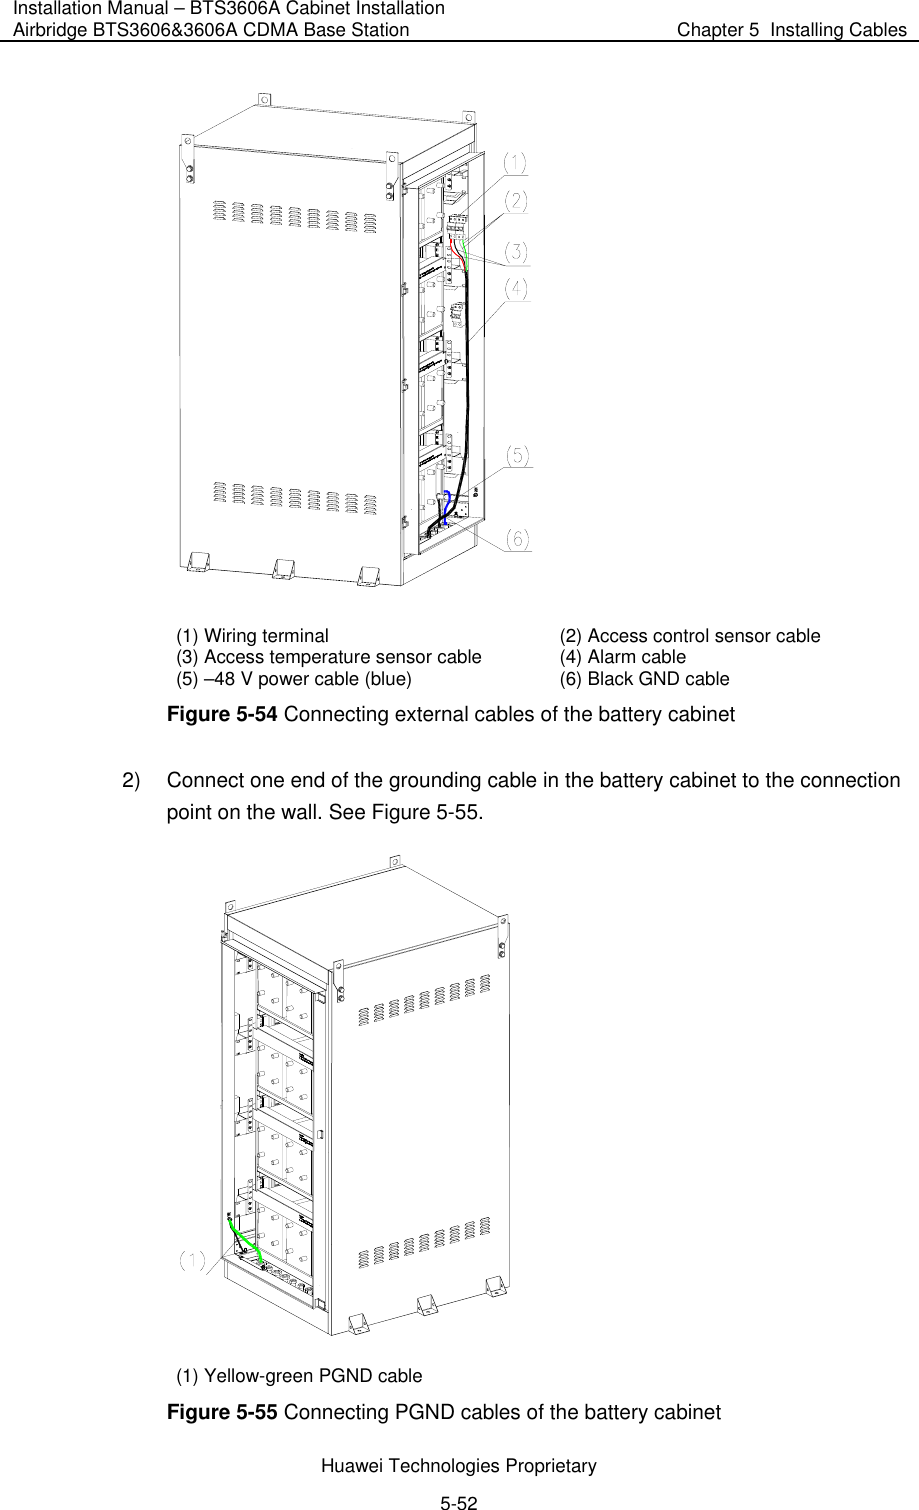 Installation Manual – BTS3606A Cabinet Installation Airbridge BTS3606&amp;3606A CDMA Base Station  Chapter 5  Installing Cables  Huawei Technologies Proprietary 5-52  (1) Wiring terminal  (2) Access control sensor cable (3) Access temperature sensor cable  (4) Alarm cable (5) –48 V power cable (blue)  (6) Black GND cable Figure 5-54 Connecting external cables of the battery cabinet 2)  Connect one end of the grounding cable in the battery cabinet to the connection point on the wall. See Figure 5-55.   (1) Yellow-green PGND cable Figure 5-55 Connecting PGND cables of the battery cabinet 